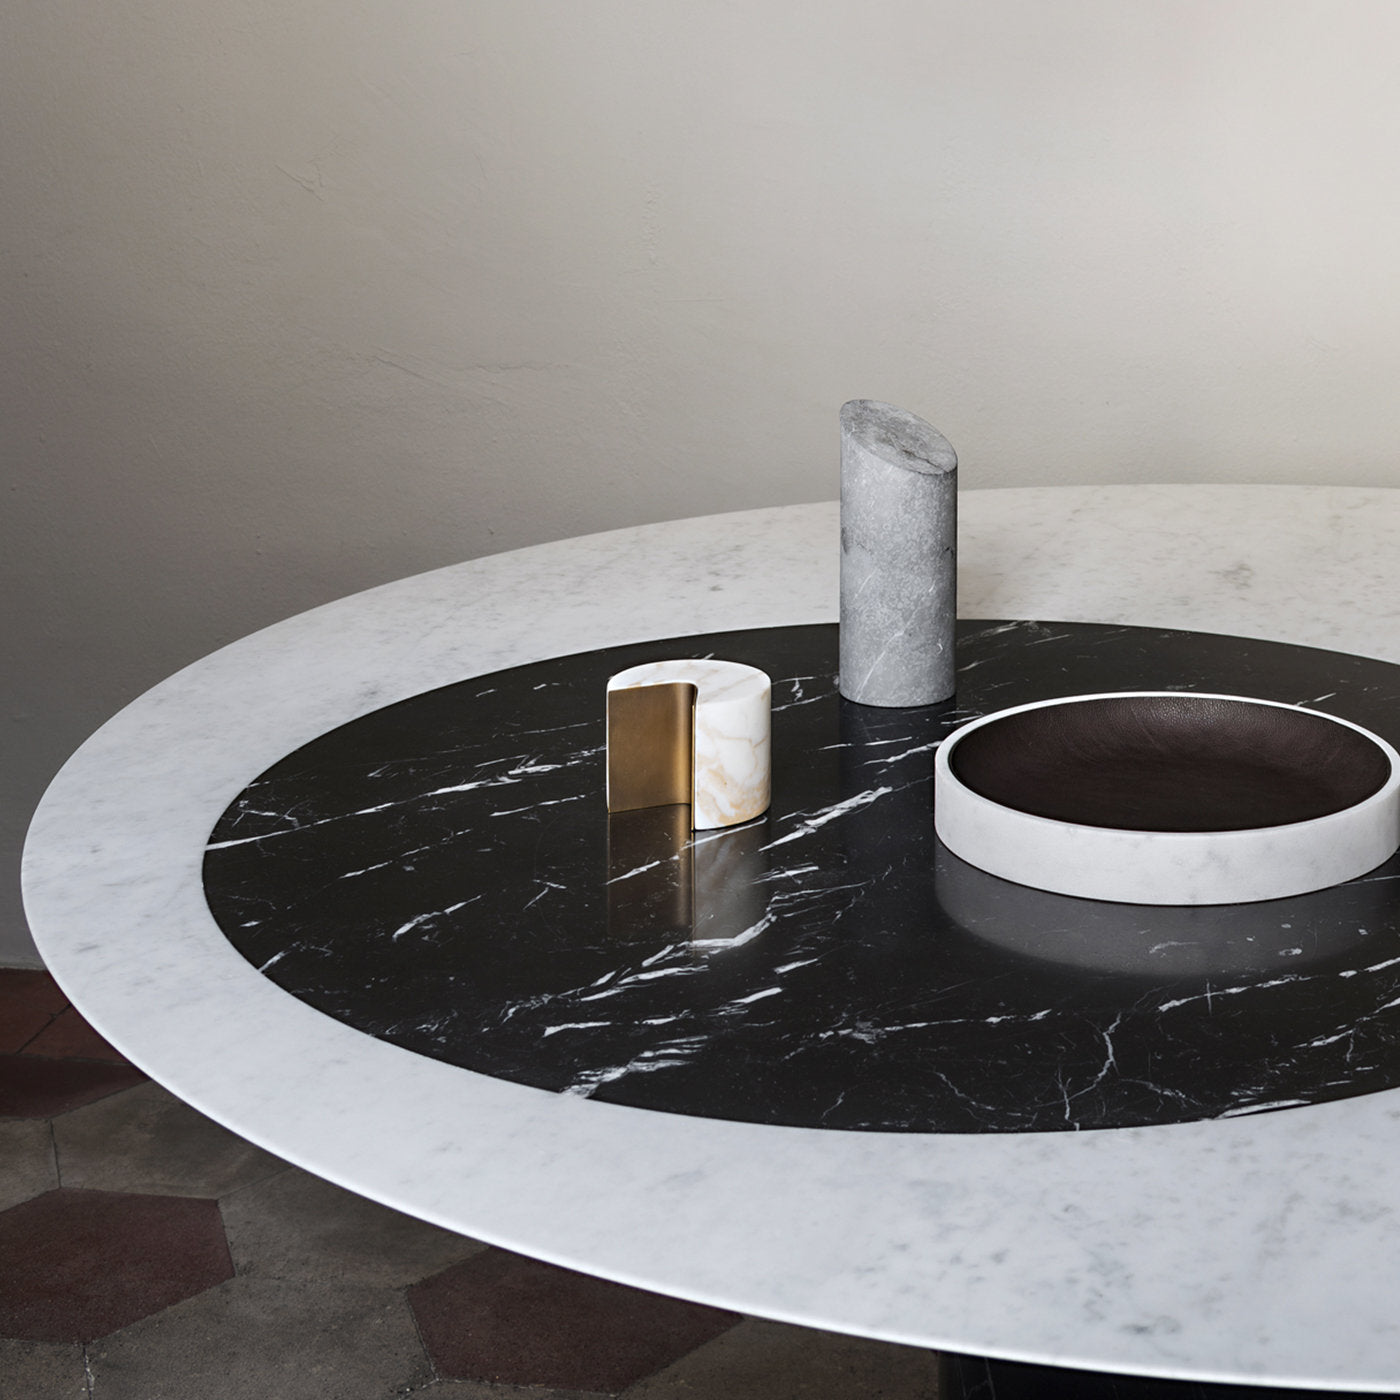 Proiezioni Round Black and White Marble Dining Table #1 by Elisa Ossino - Alternative view 2